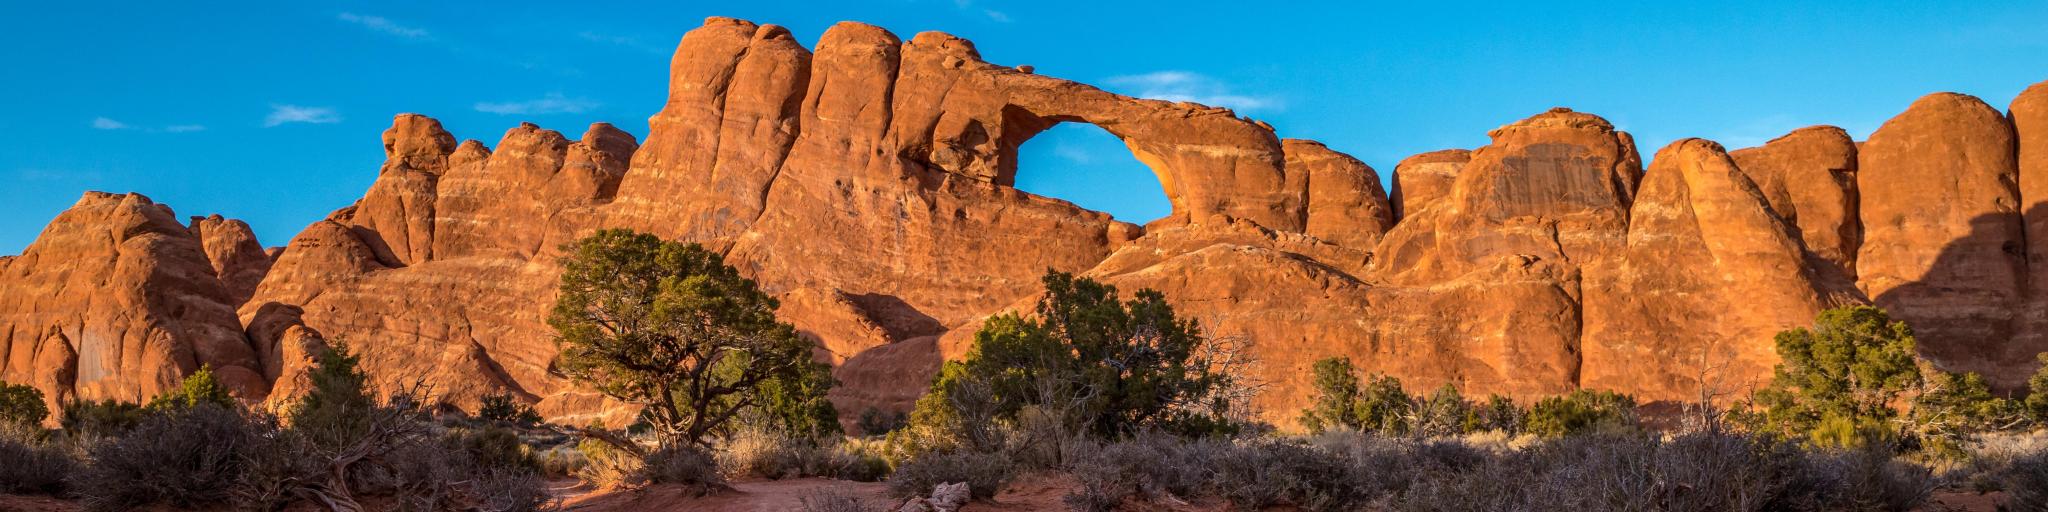 Bright sunlight illuminating the beautiful Skyline Arch sandstone rock formation at golden hour, Arches National Park, Moab, Utah